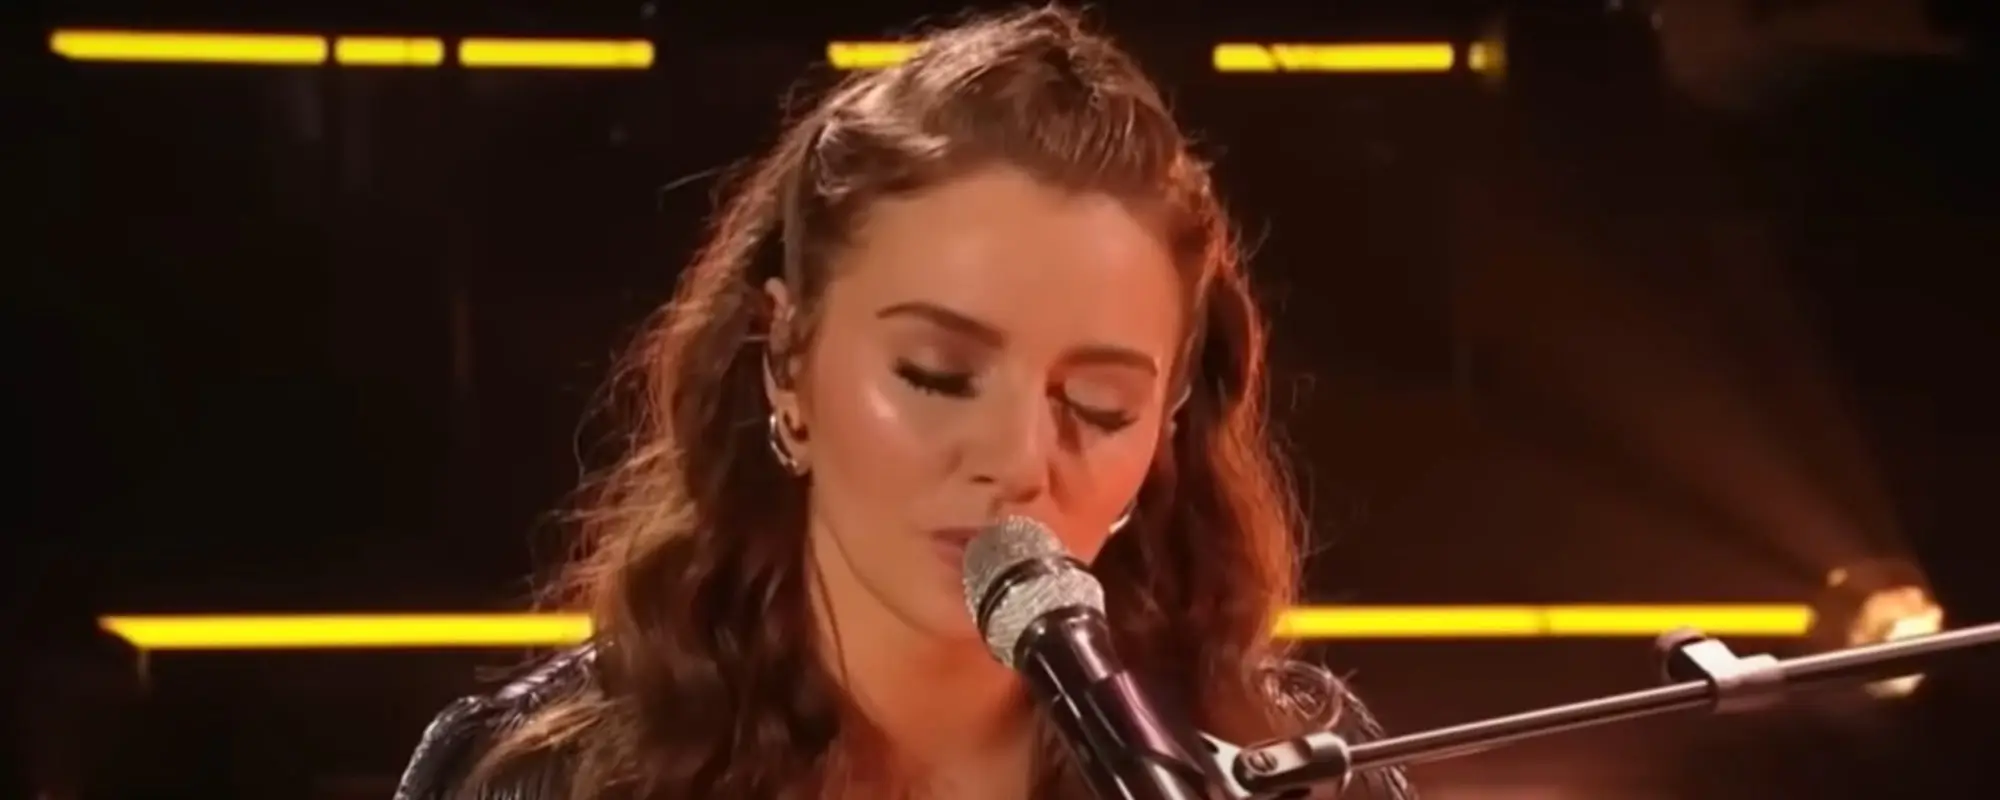 Emmy Russell Says She Felt Like Herself While Performing Loretta Lynn’s “Coal Miner’s Daughter” on ‘American Idol’